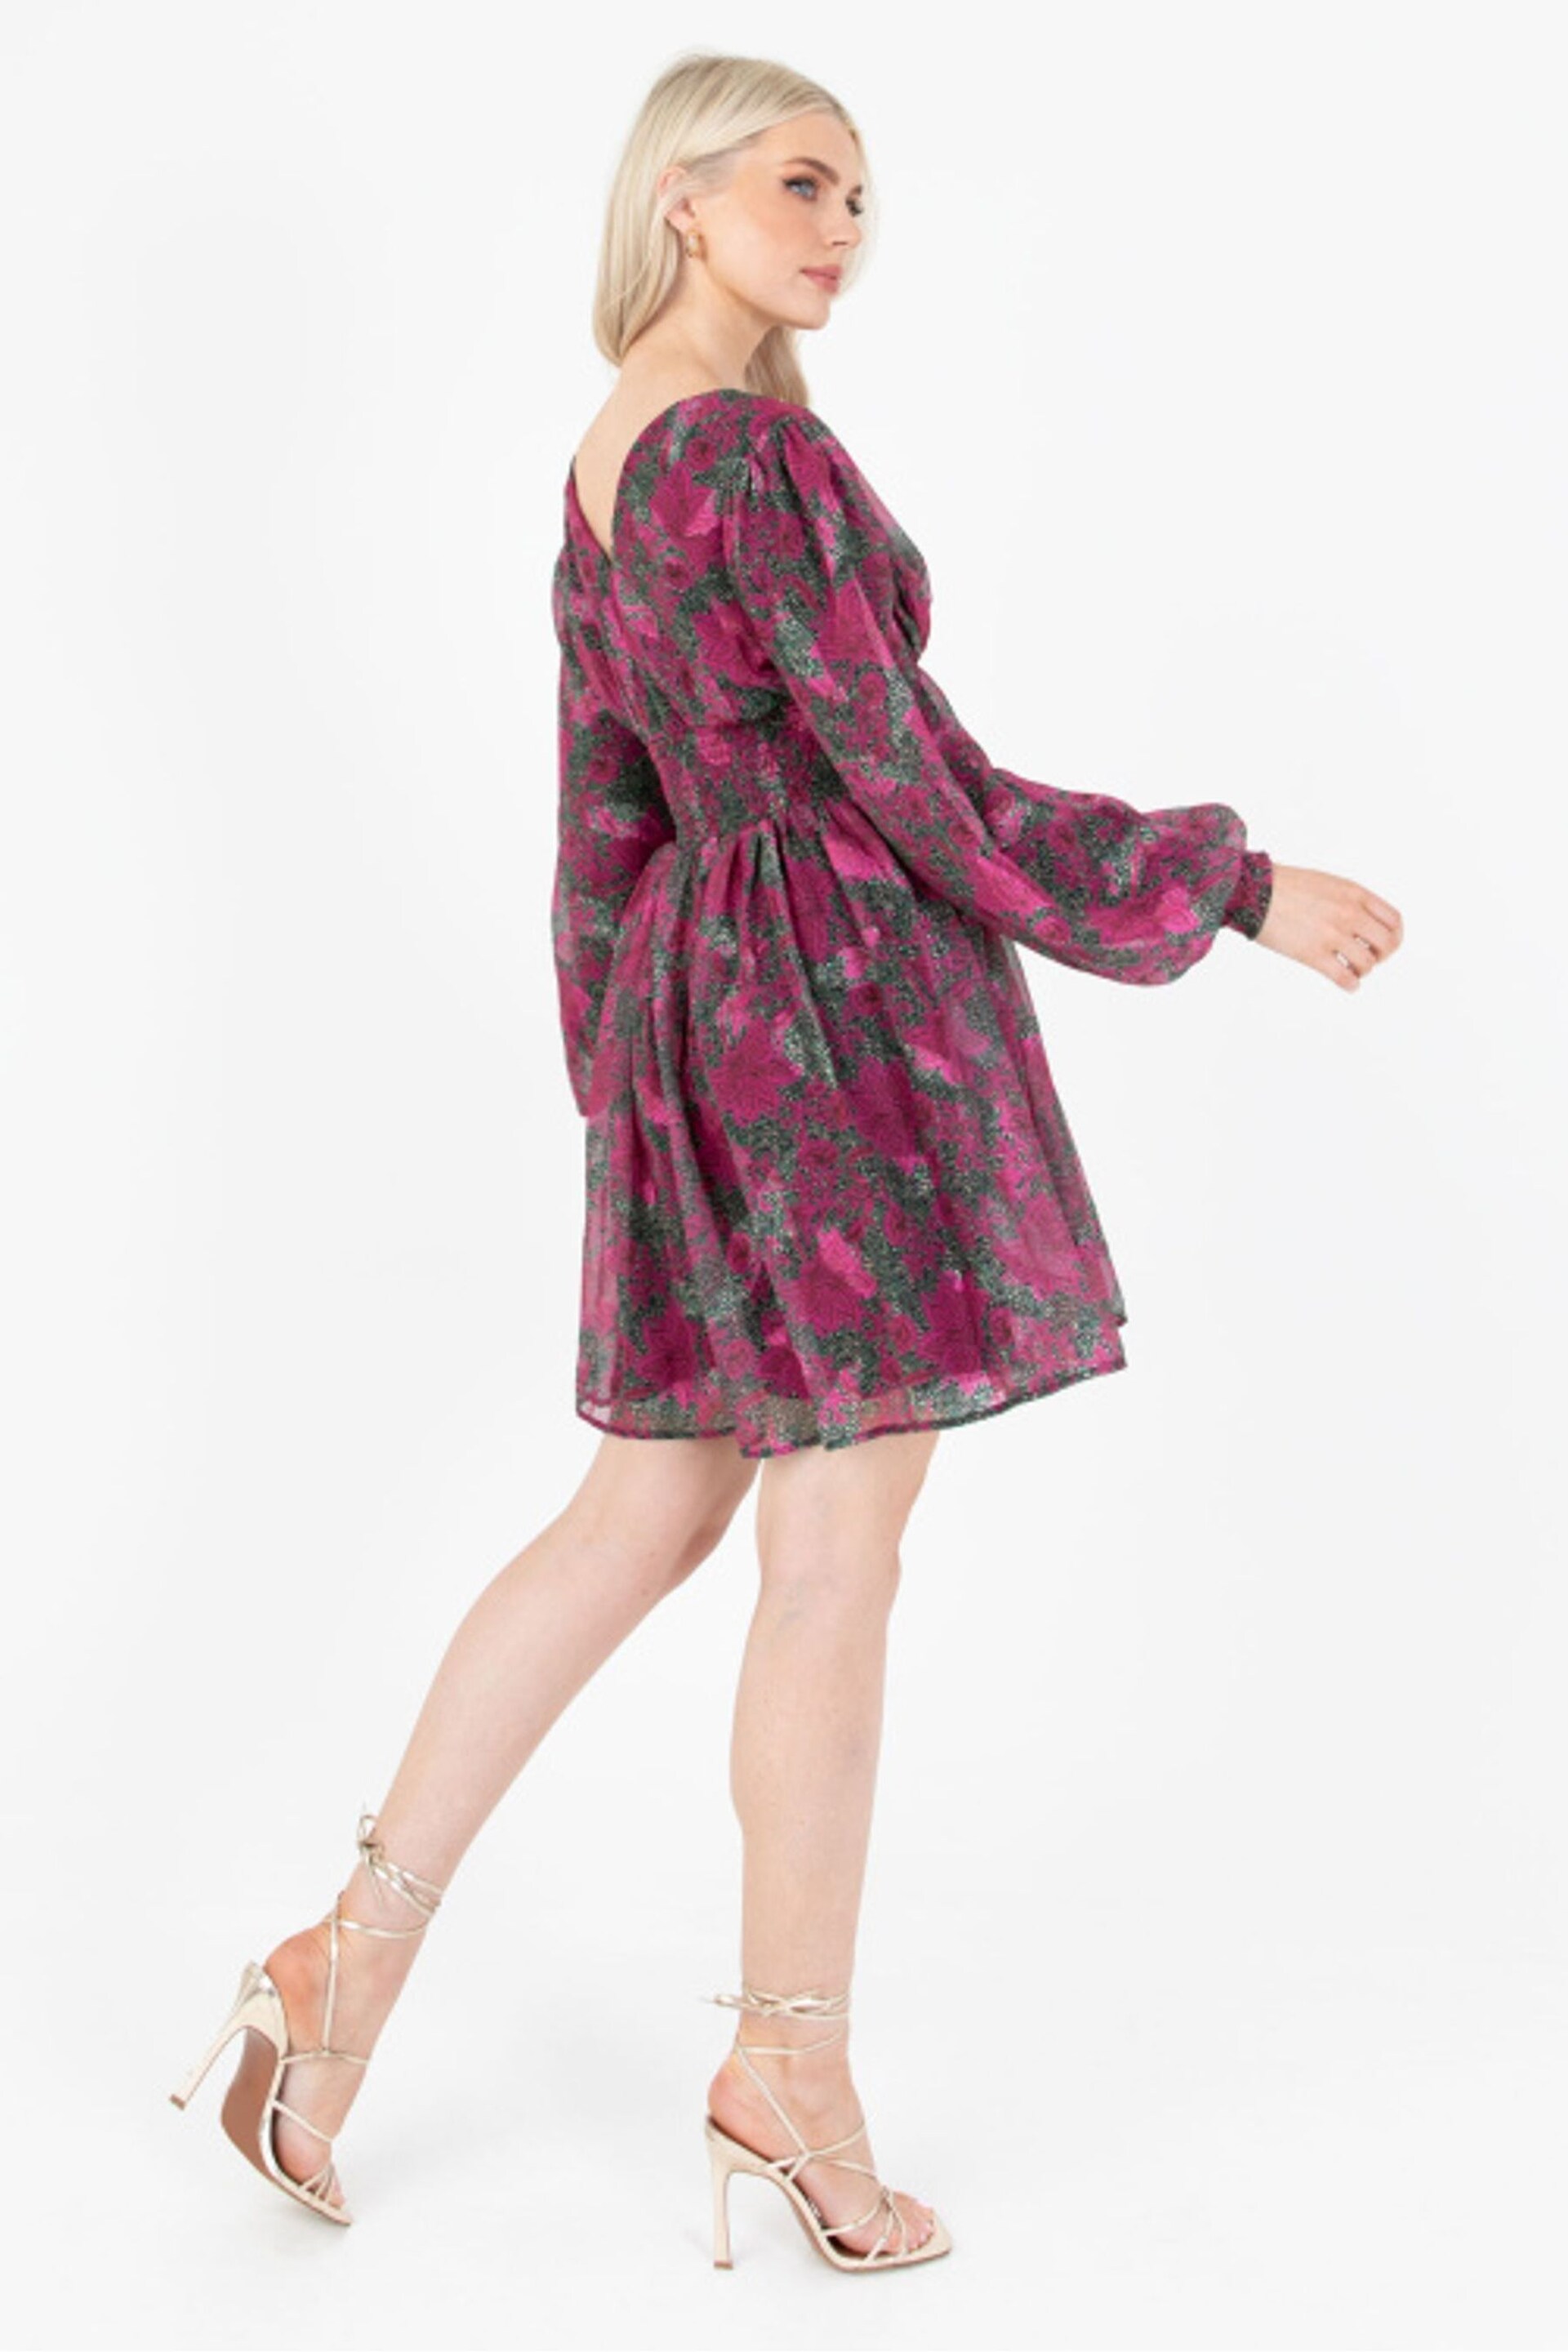 Lovedrobe Pink Printed Button Front Mini Dress - Image 3 of 6